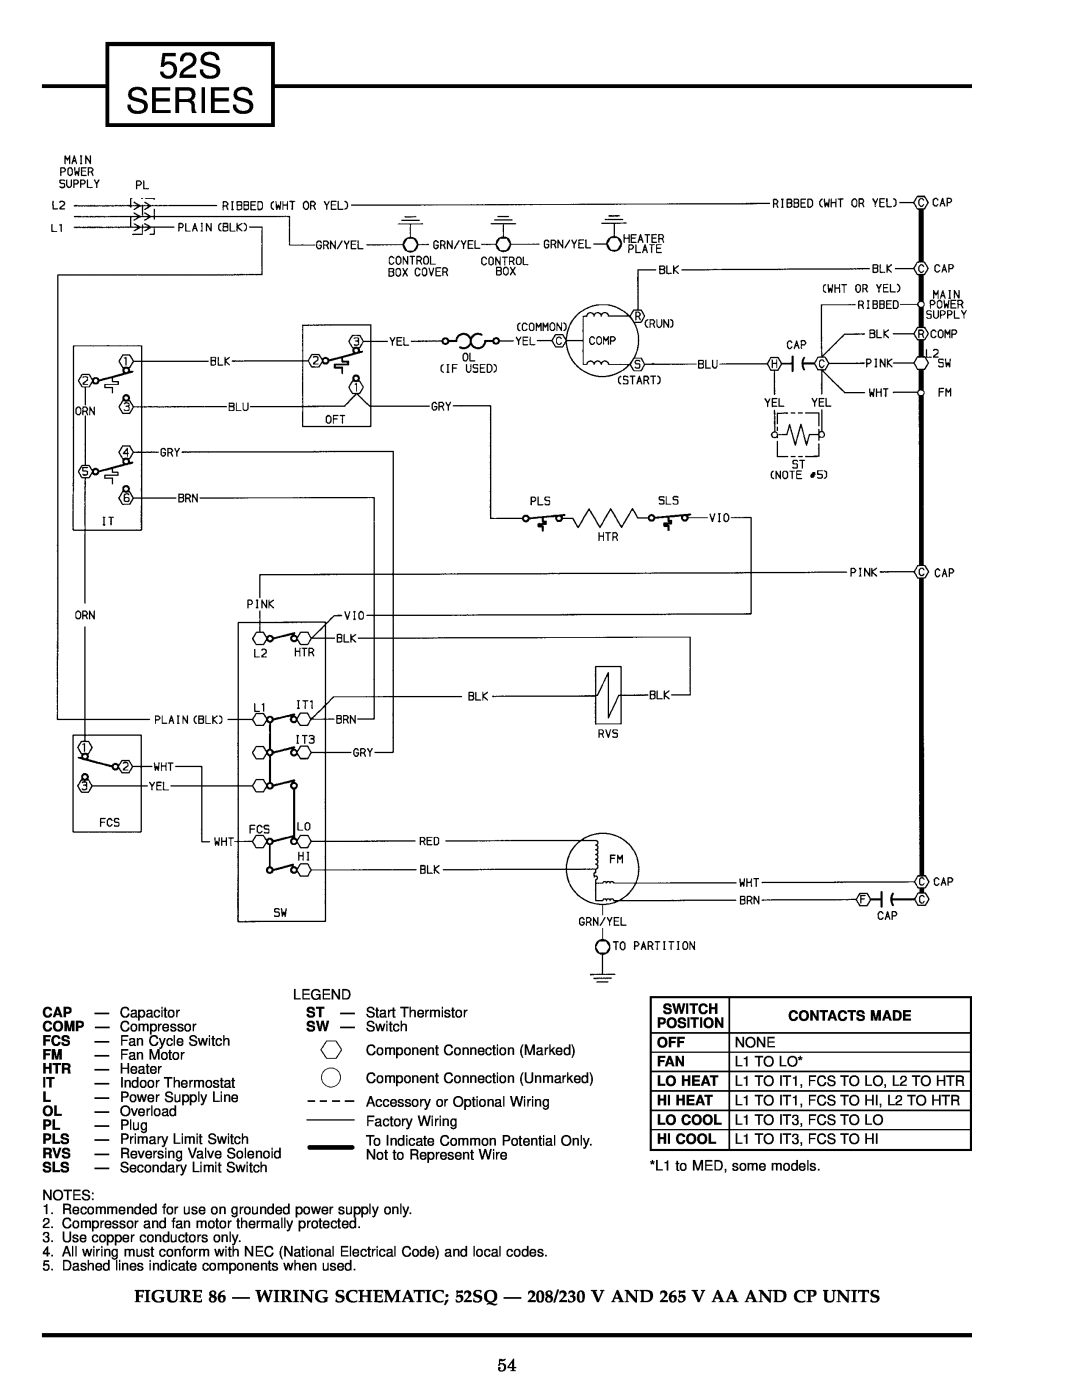 Carrier manual 52S SERIES, Ð Capacitor 